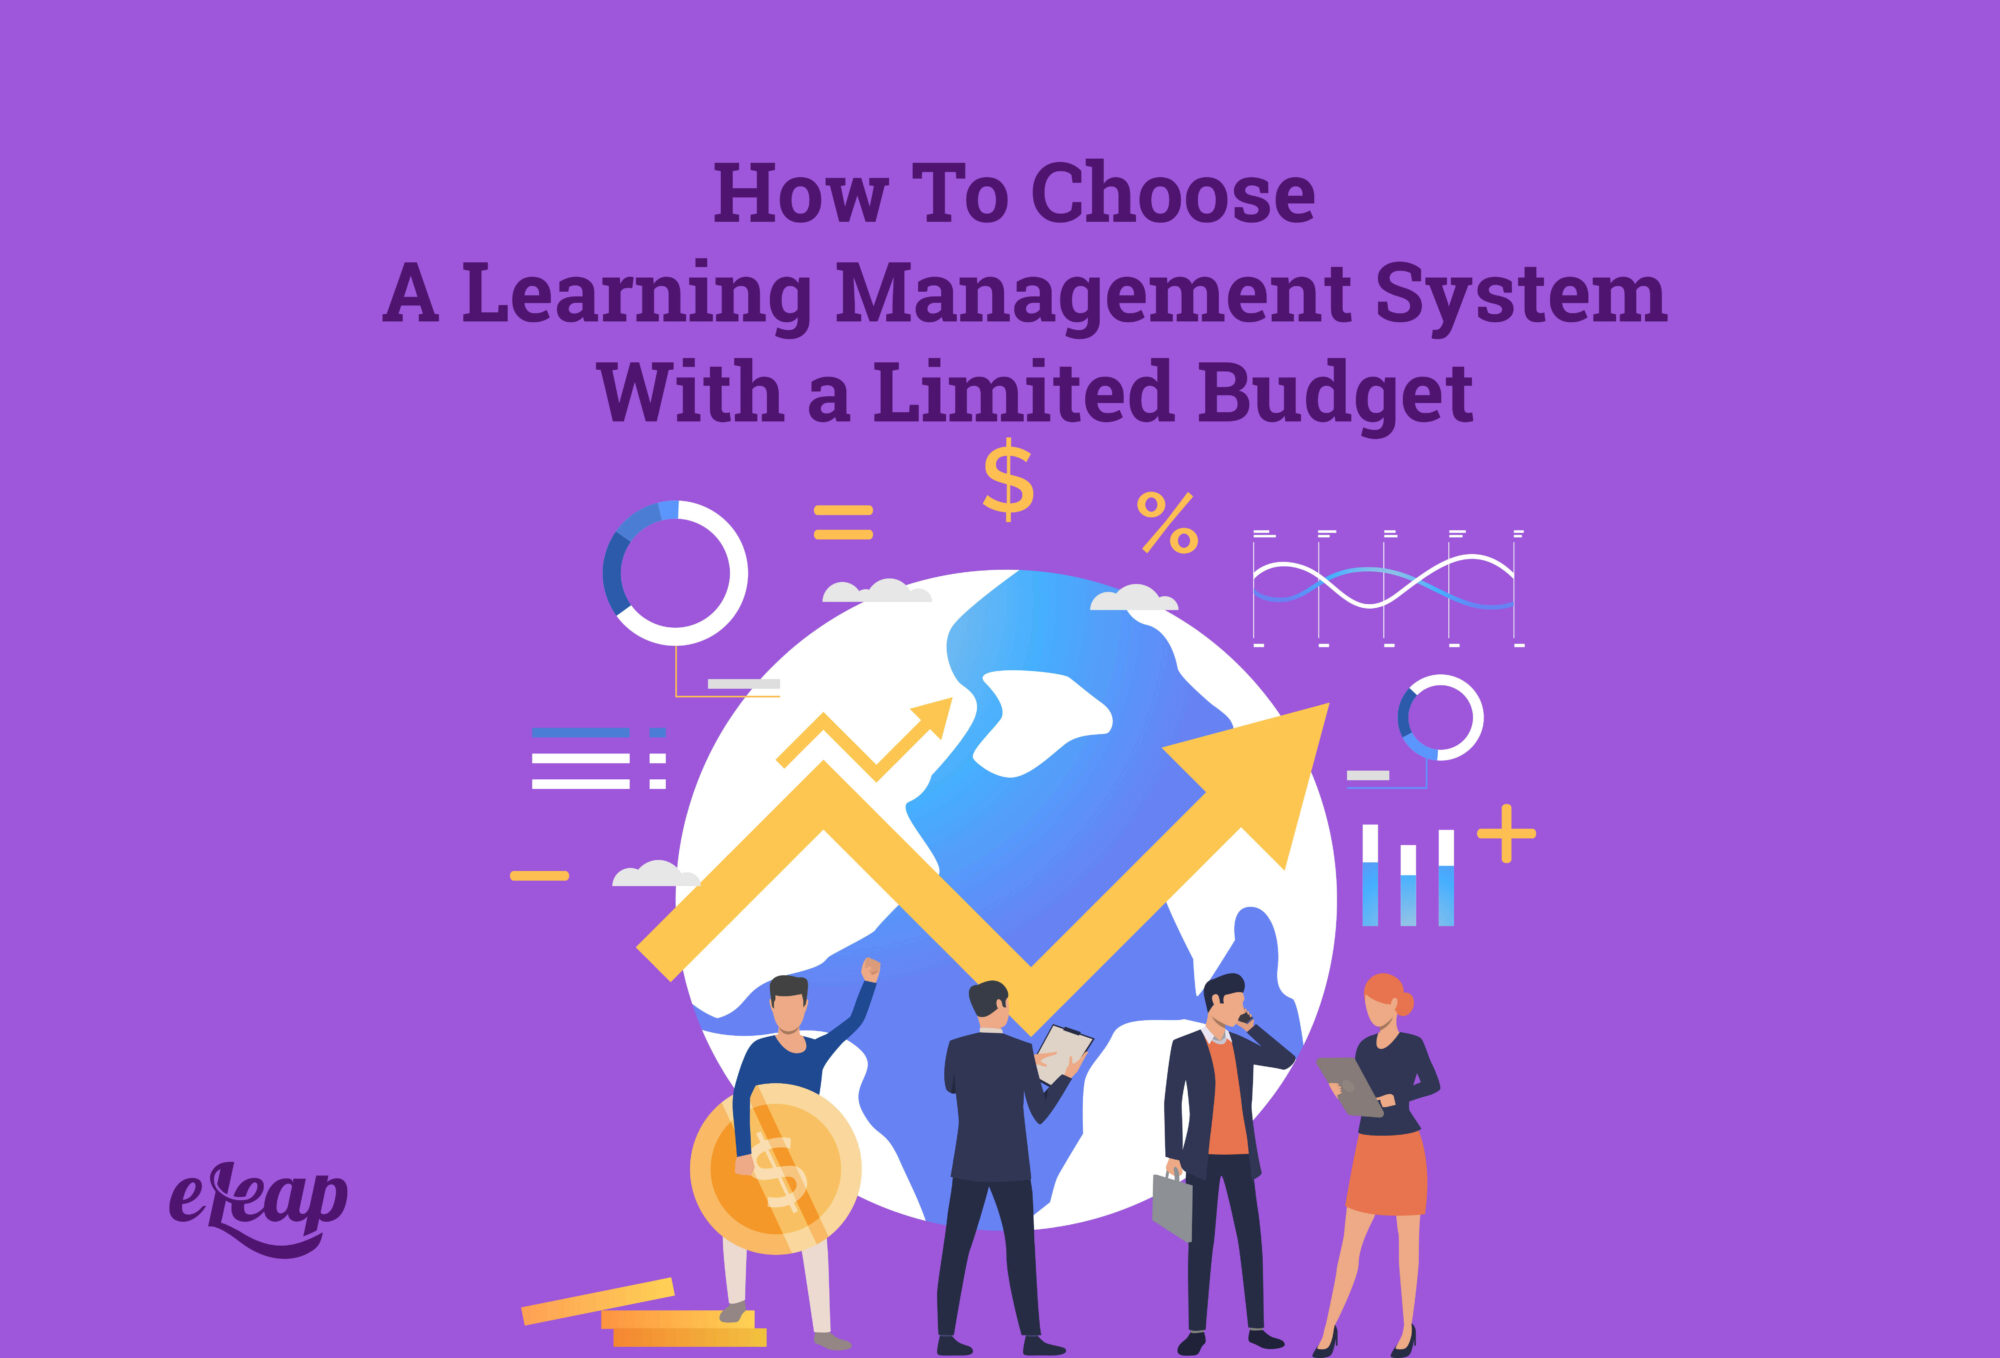 How To Choose A Learning Management System With a Limited Budget